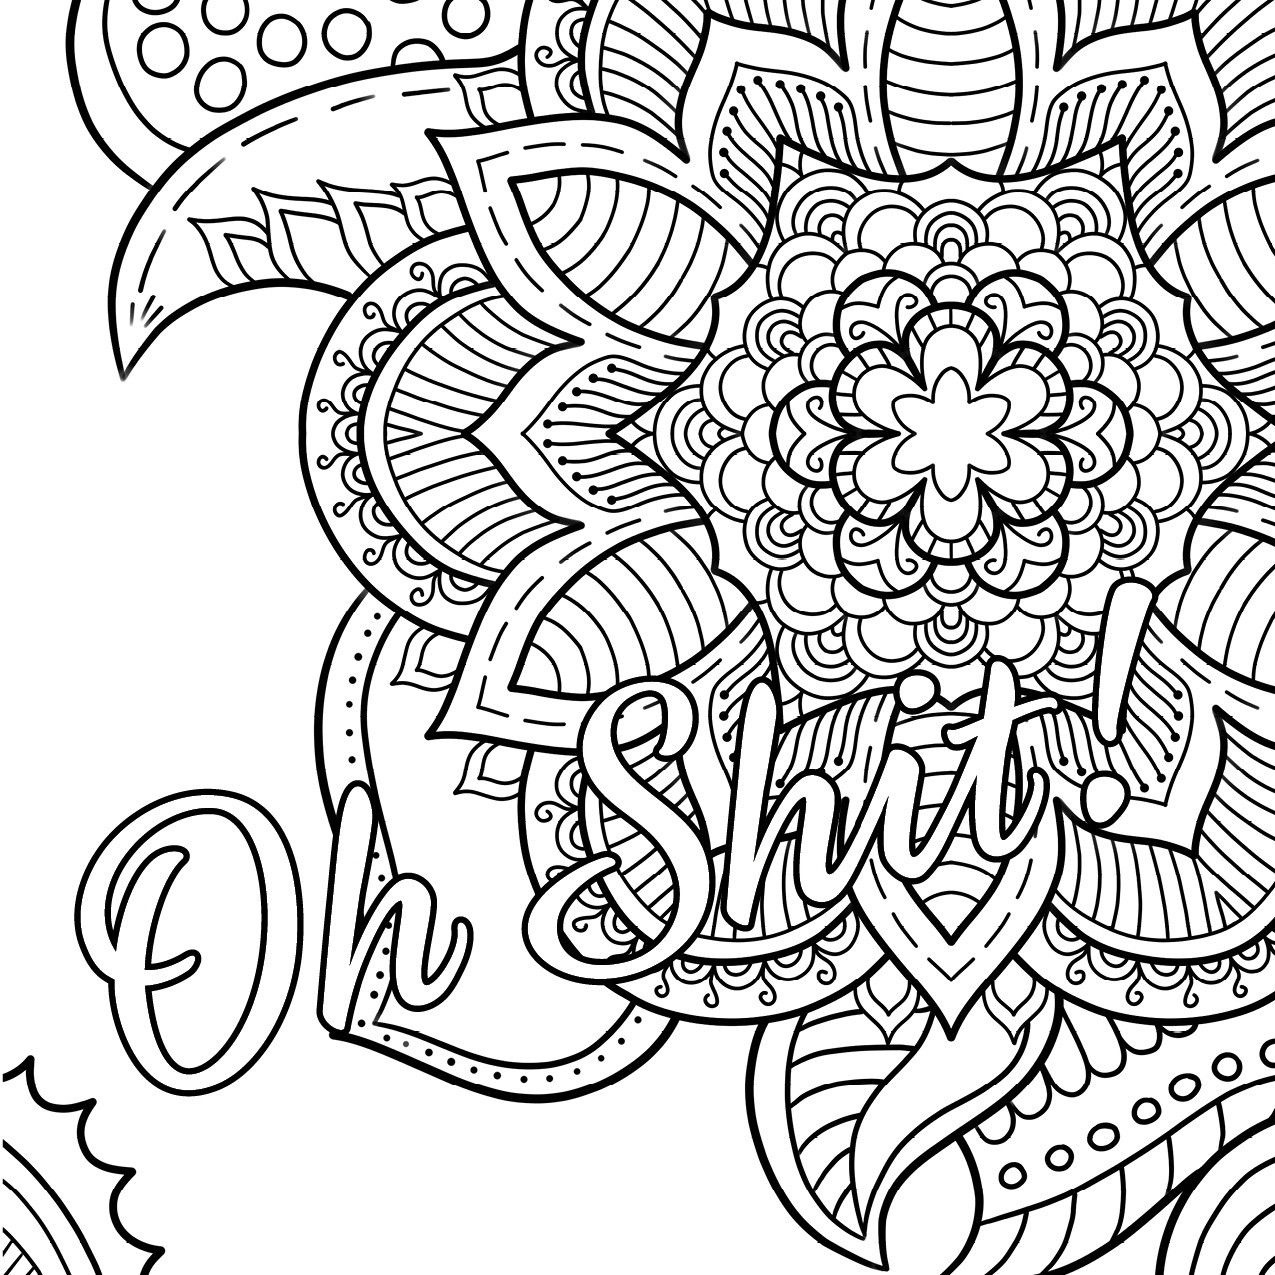 Free Printable Coloring Pages For Adults Swear Words 